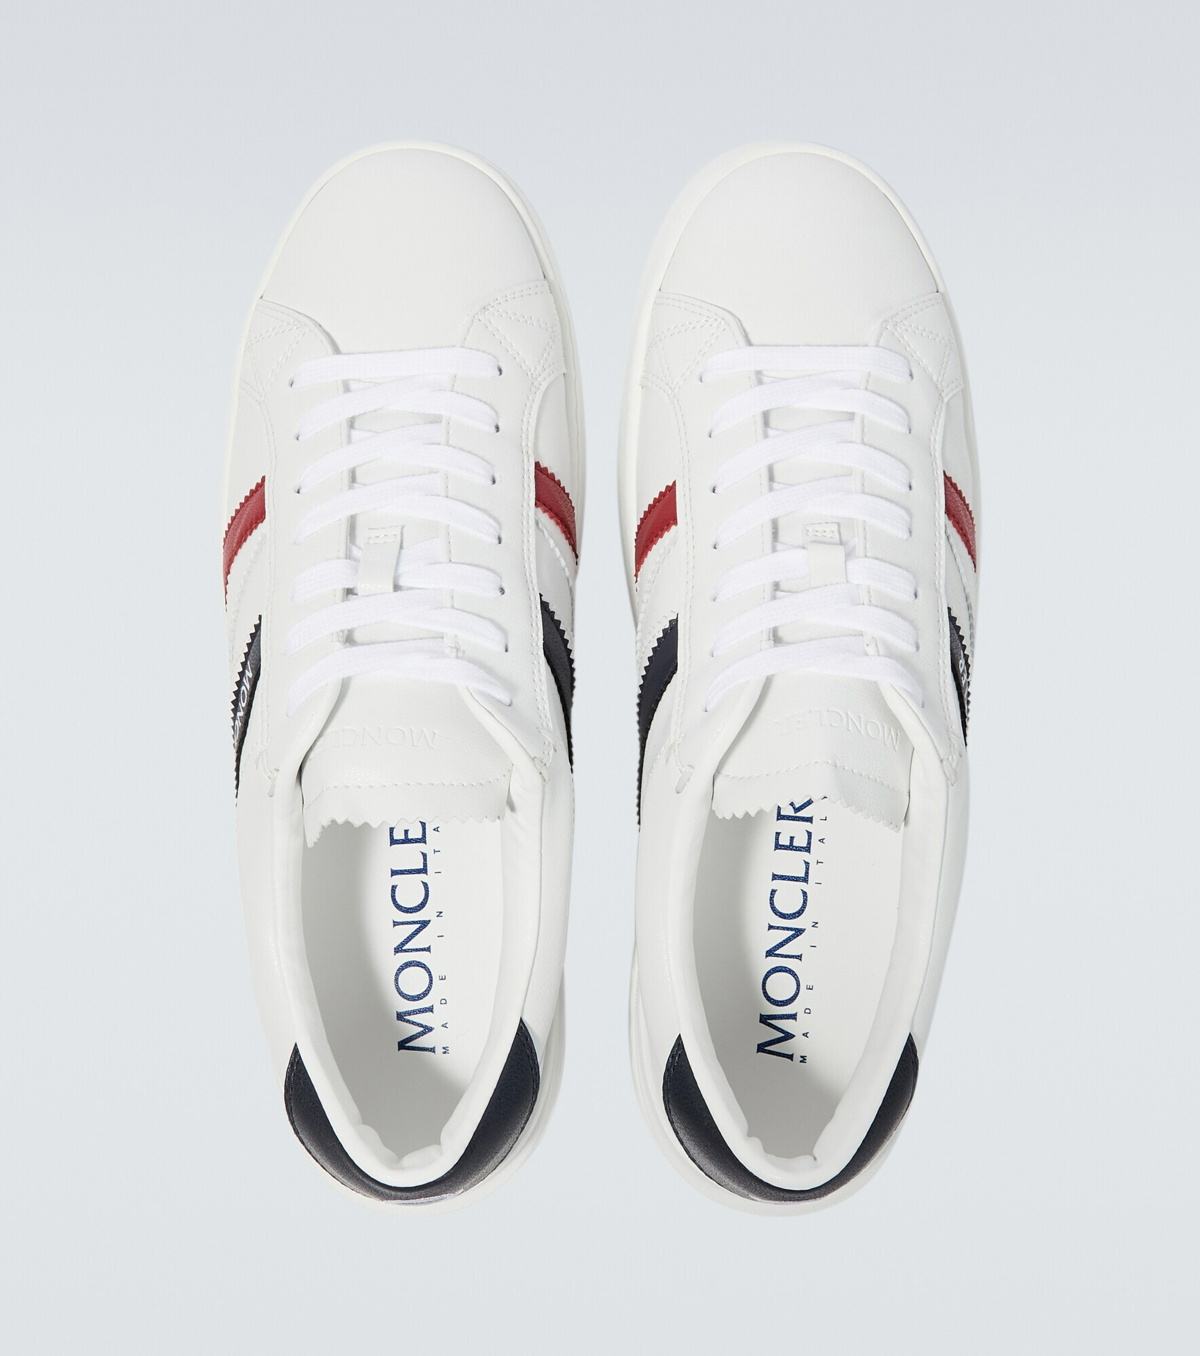 Moncler - New Monaco leather sneakers Moncler